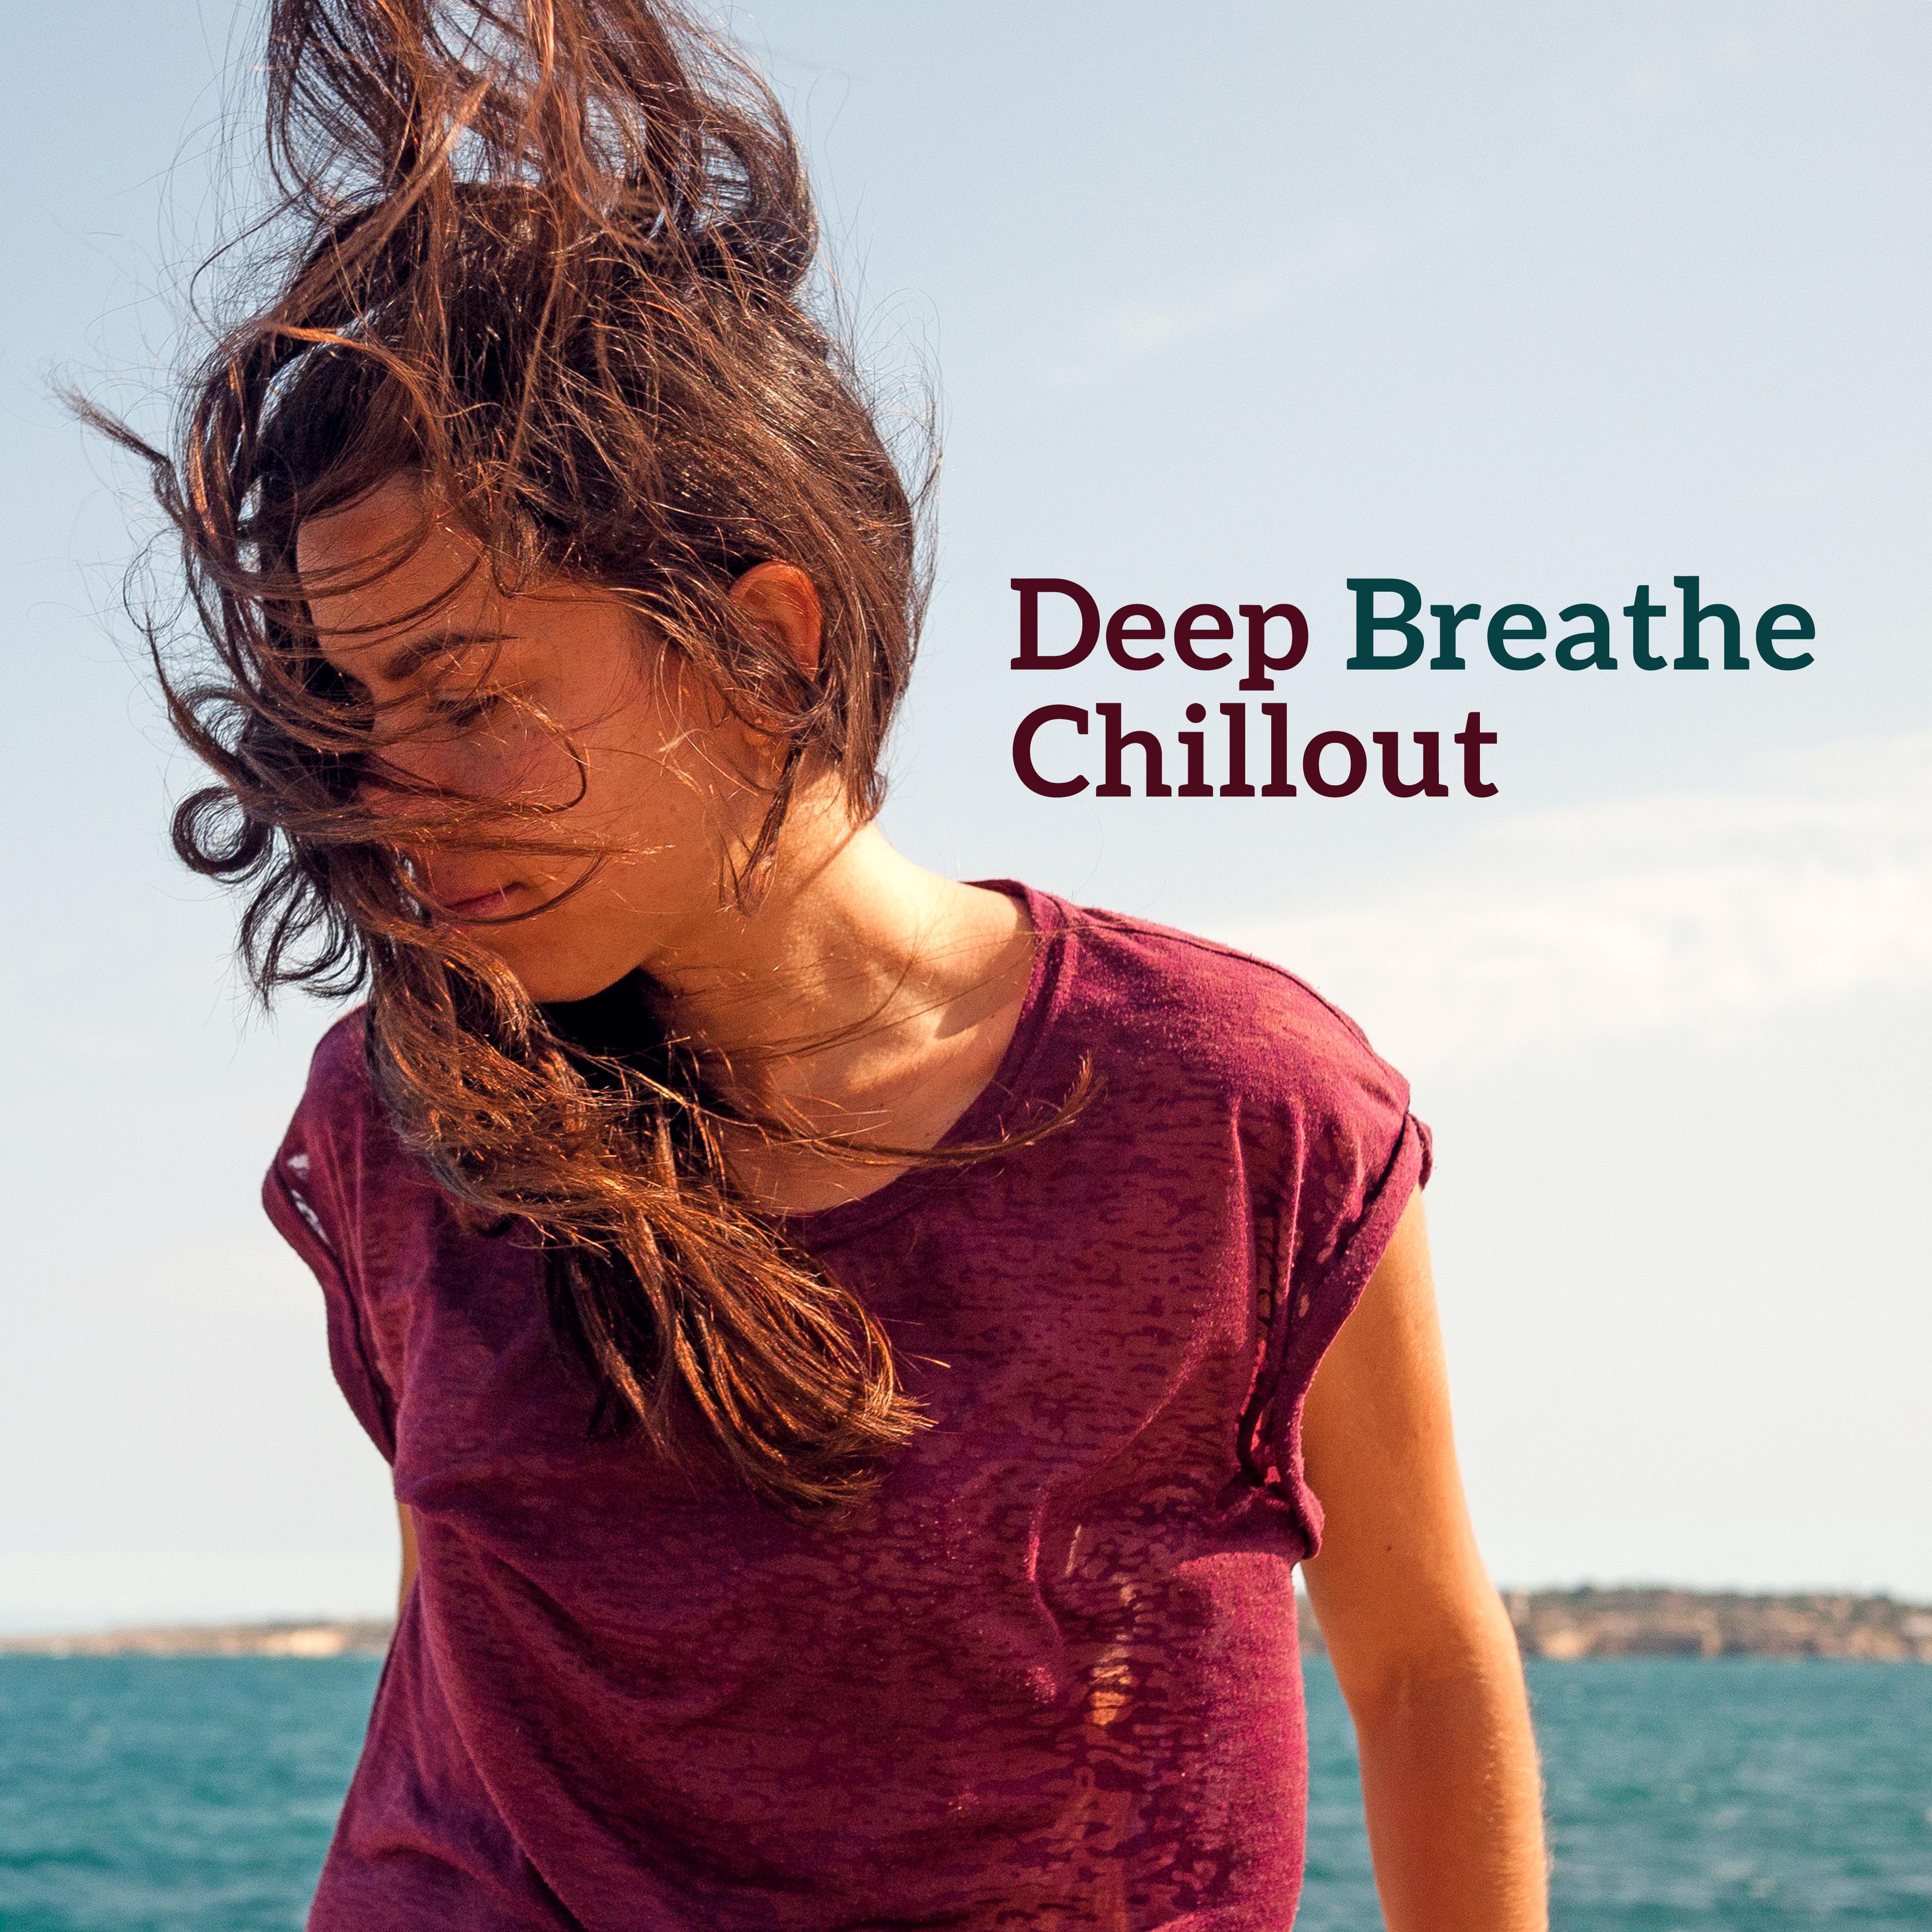 Deep Breathe Chillout – Chill Out Music, Relax & Chill, Essential Vibes